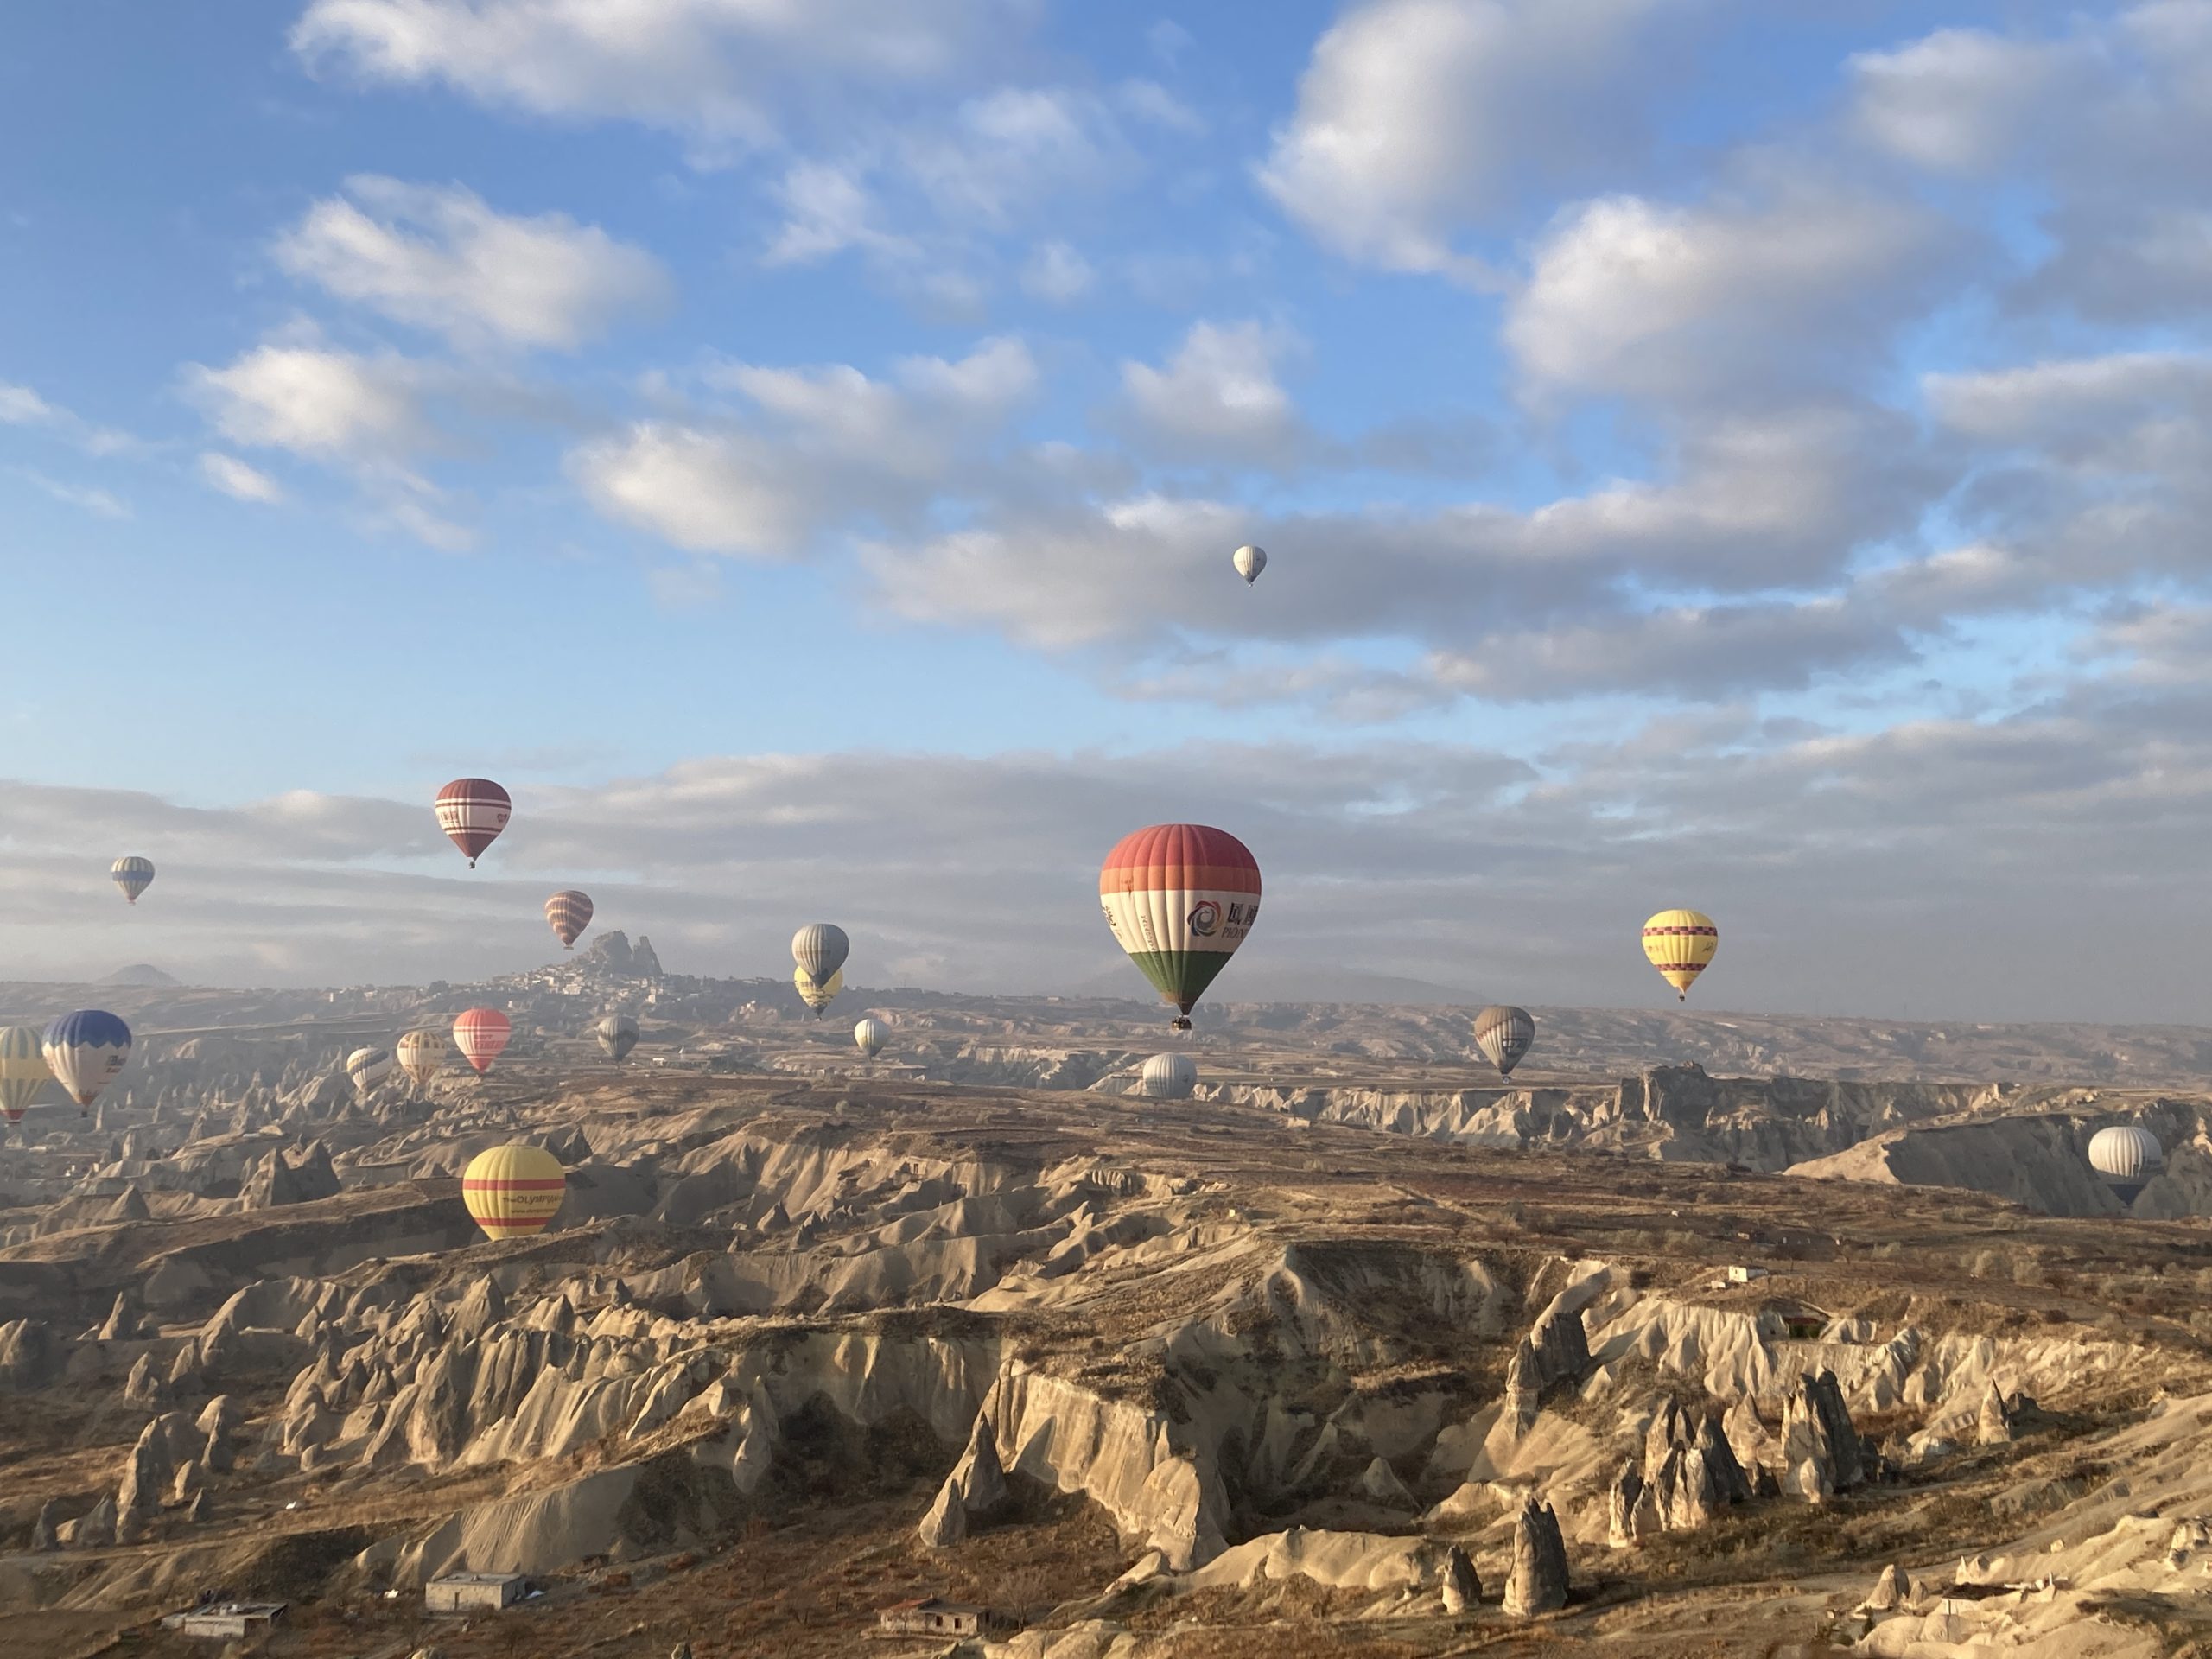 Now Is The Time To Take A Cappadocia Hot Air Balloon Ride!